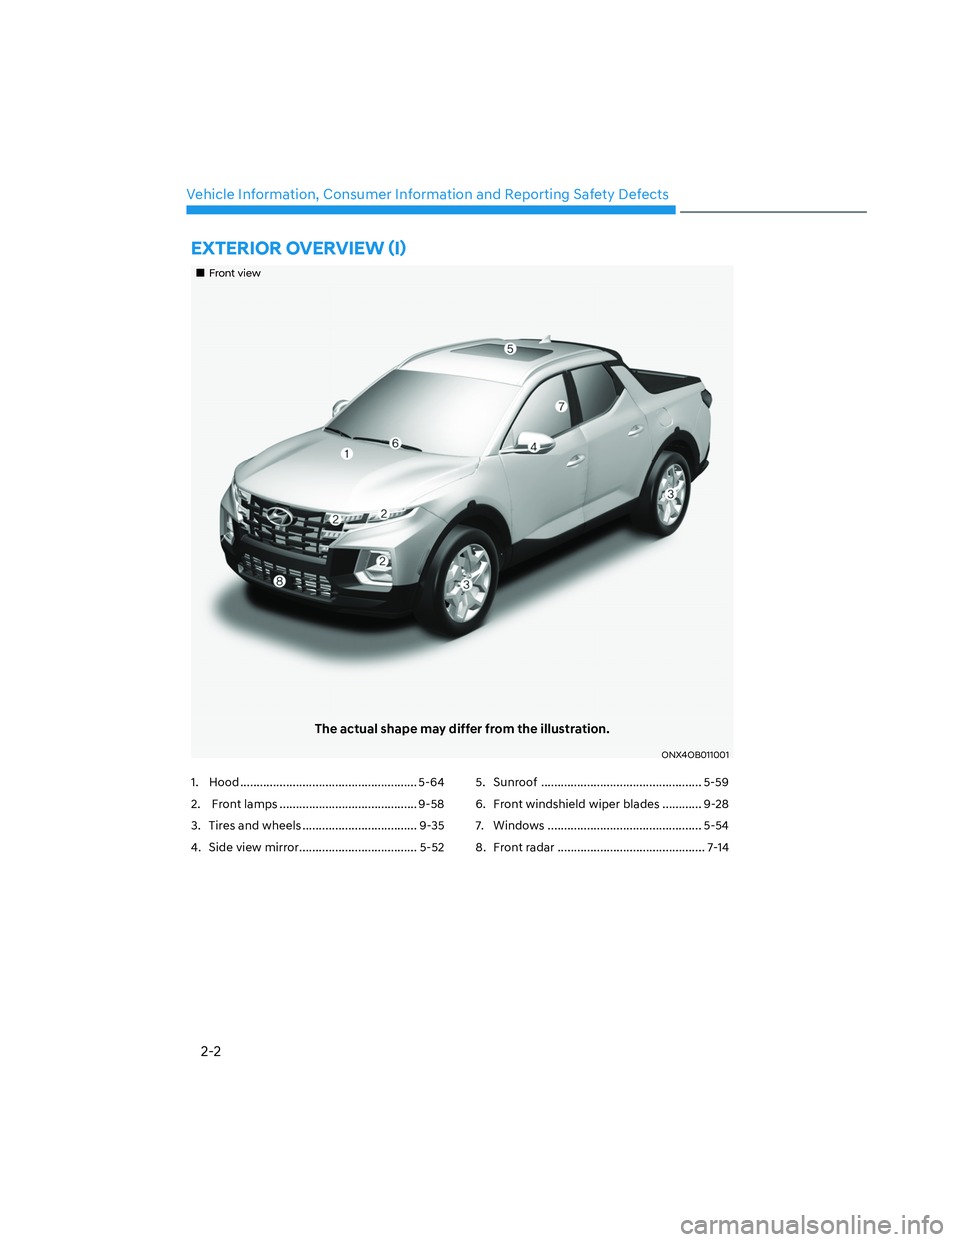 HYUNDAI SANTA CRUZ 2022 User Guide 2-2
Vehicle Information, Consumer Information and Reporting Safety Defects
�(�;�7�(�5�,�2�5��2�9�(�5�9�,�(�:�